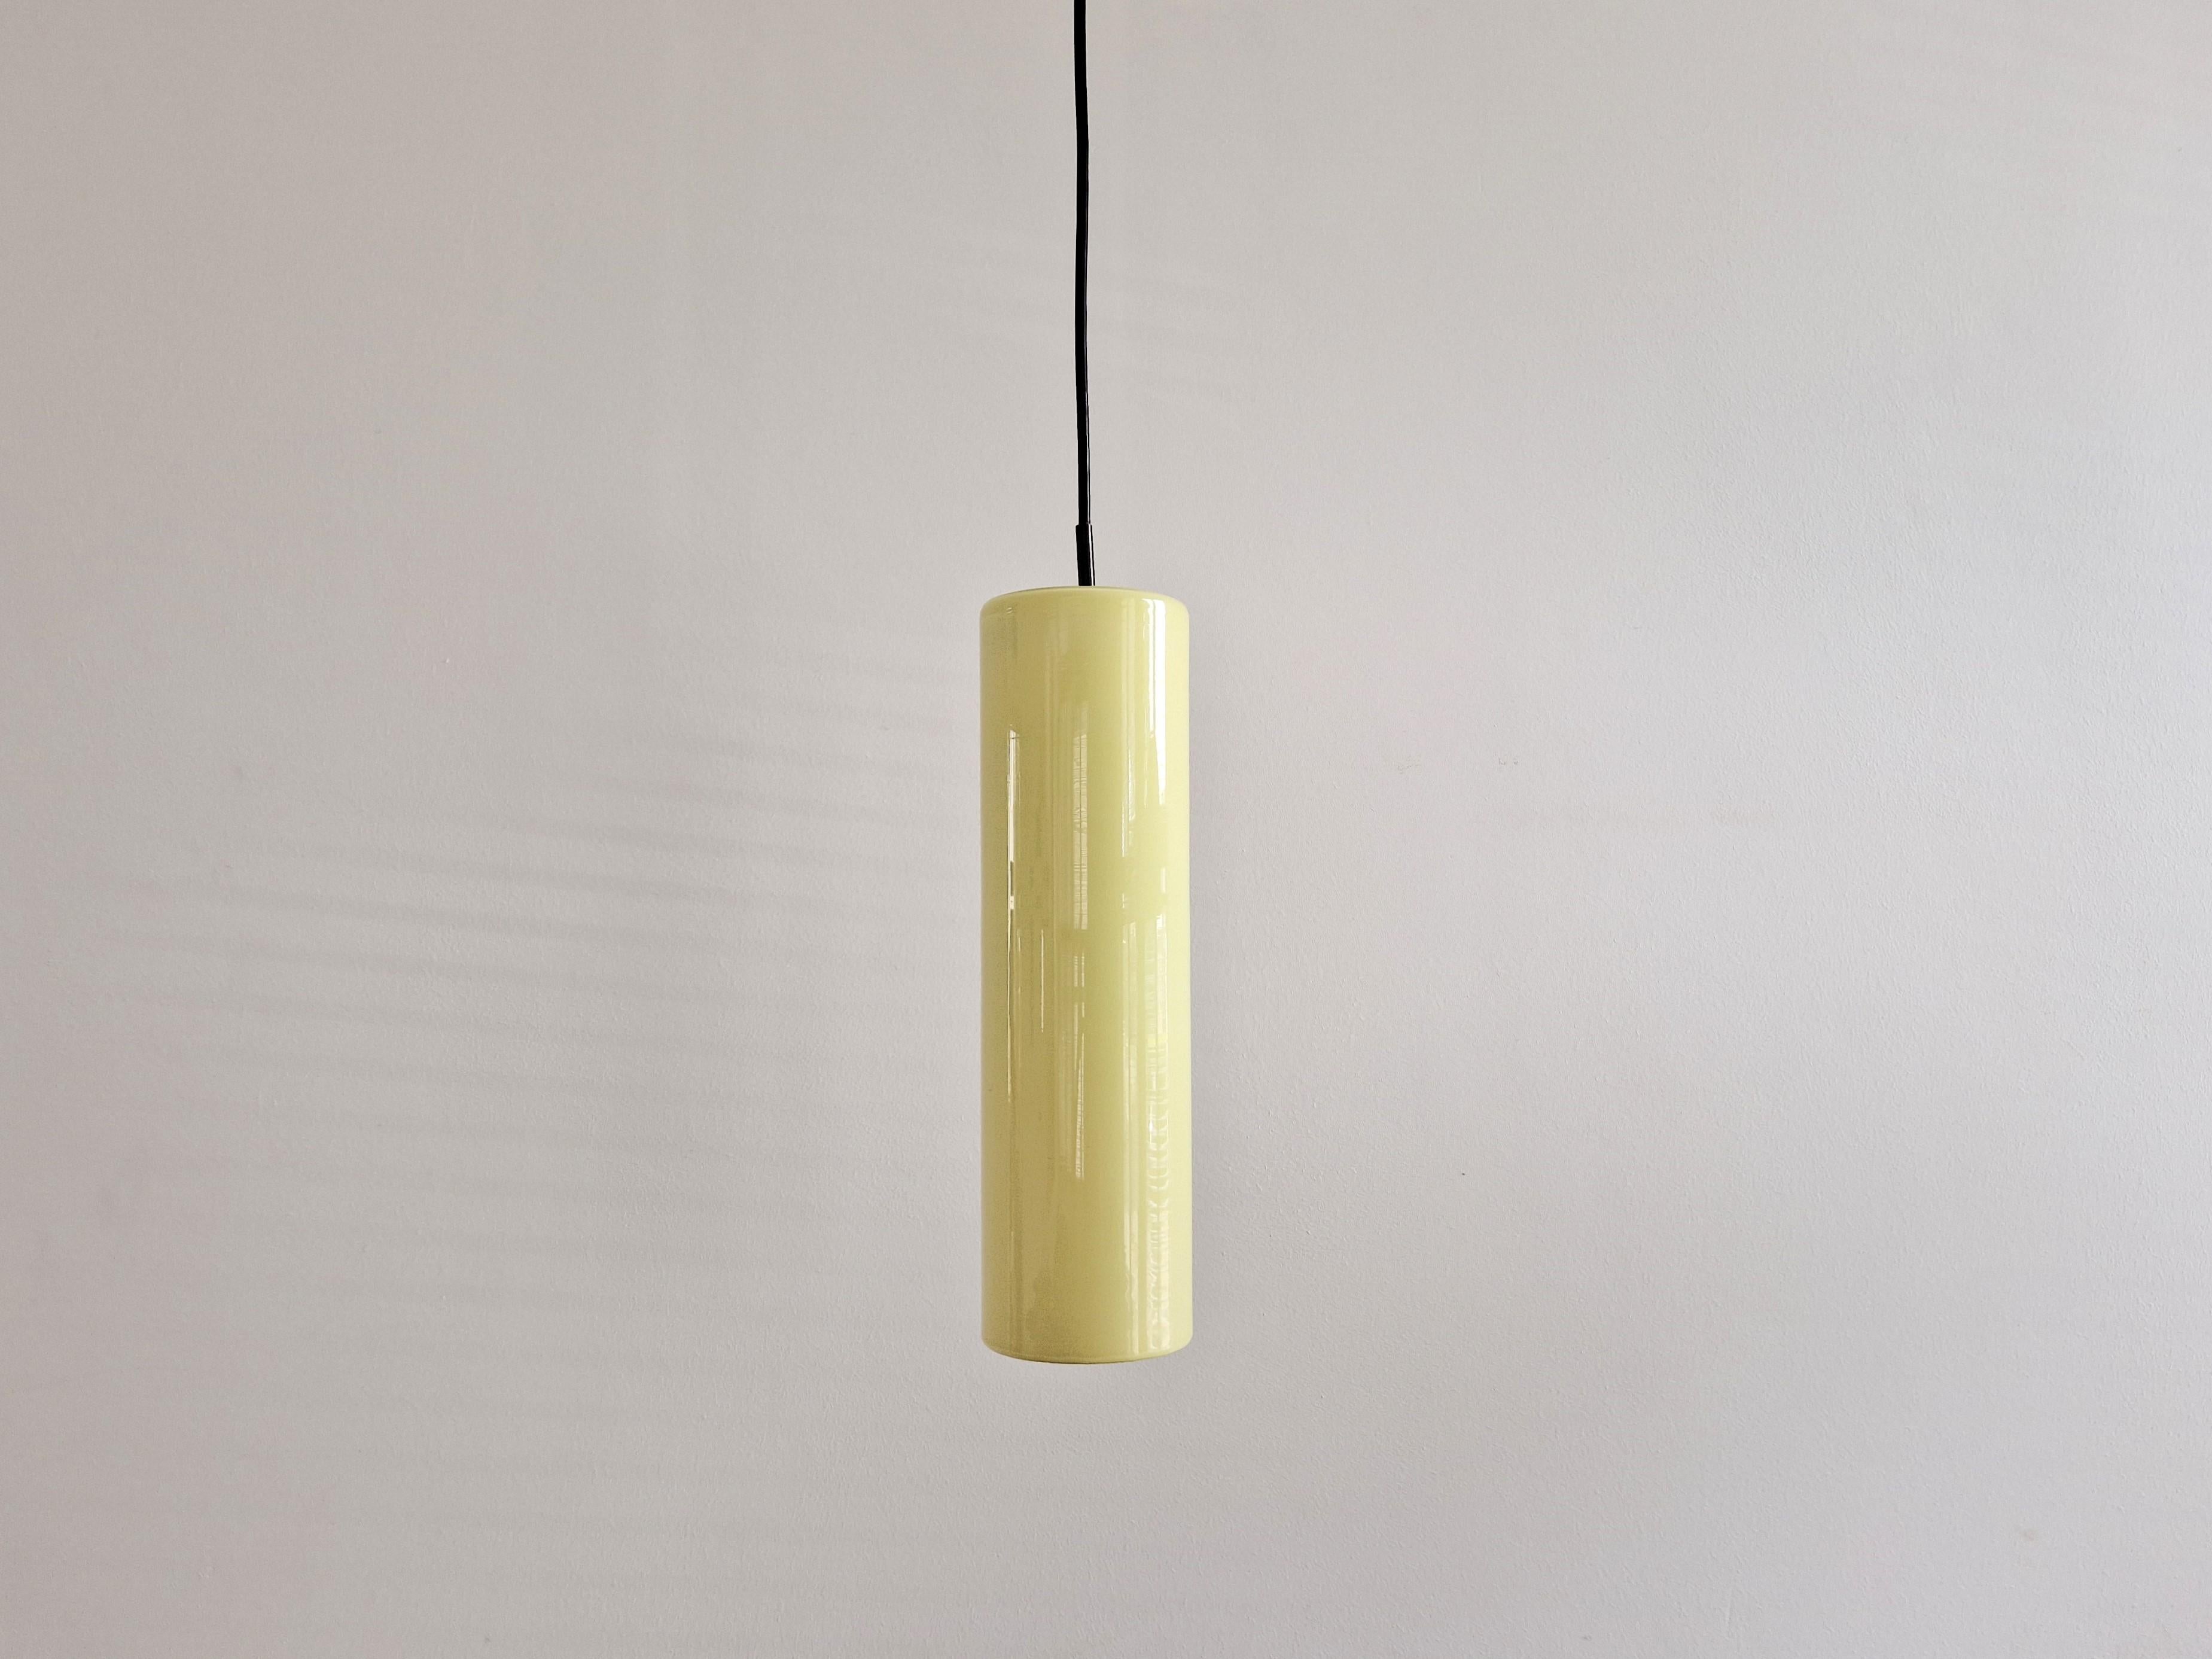 This yellow glass cylindrical pendant lamp was designed by Massimo Vignelli for Venini in the 1960's. It was made in 2 sizes with a height of 30 cm and 40 cm. This lamp is the large and more rare version. It is made of a beautiful pastel yellow